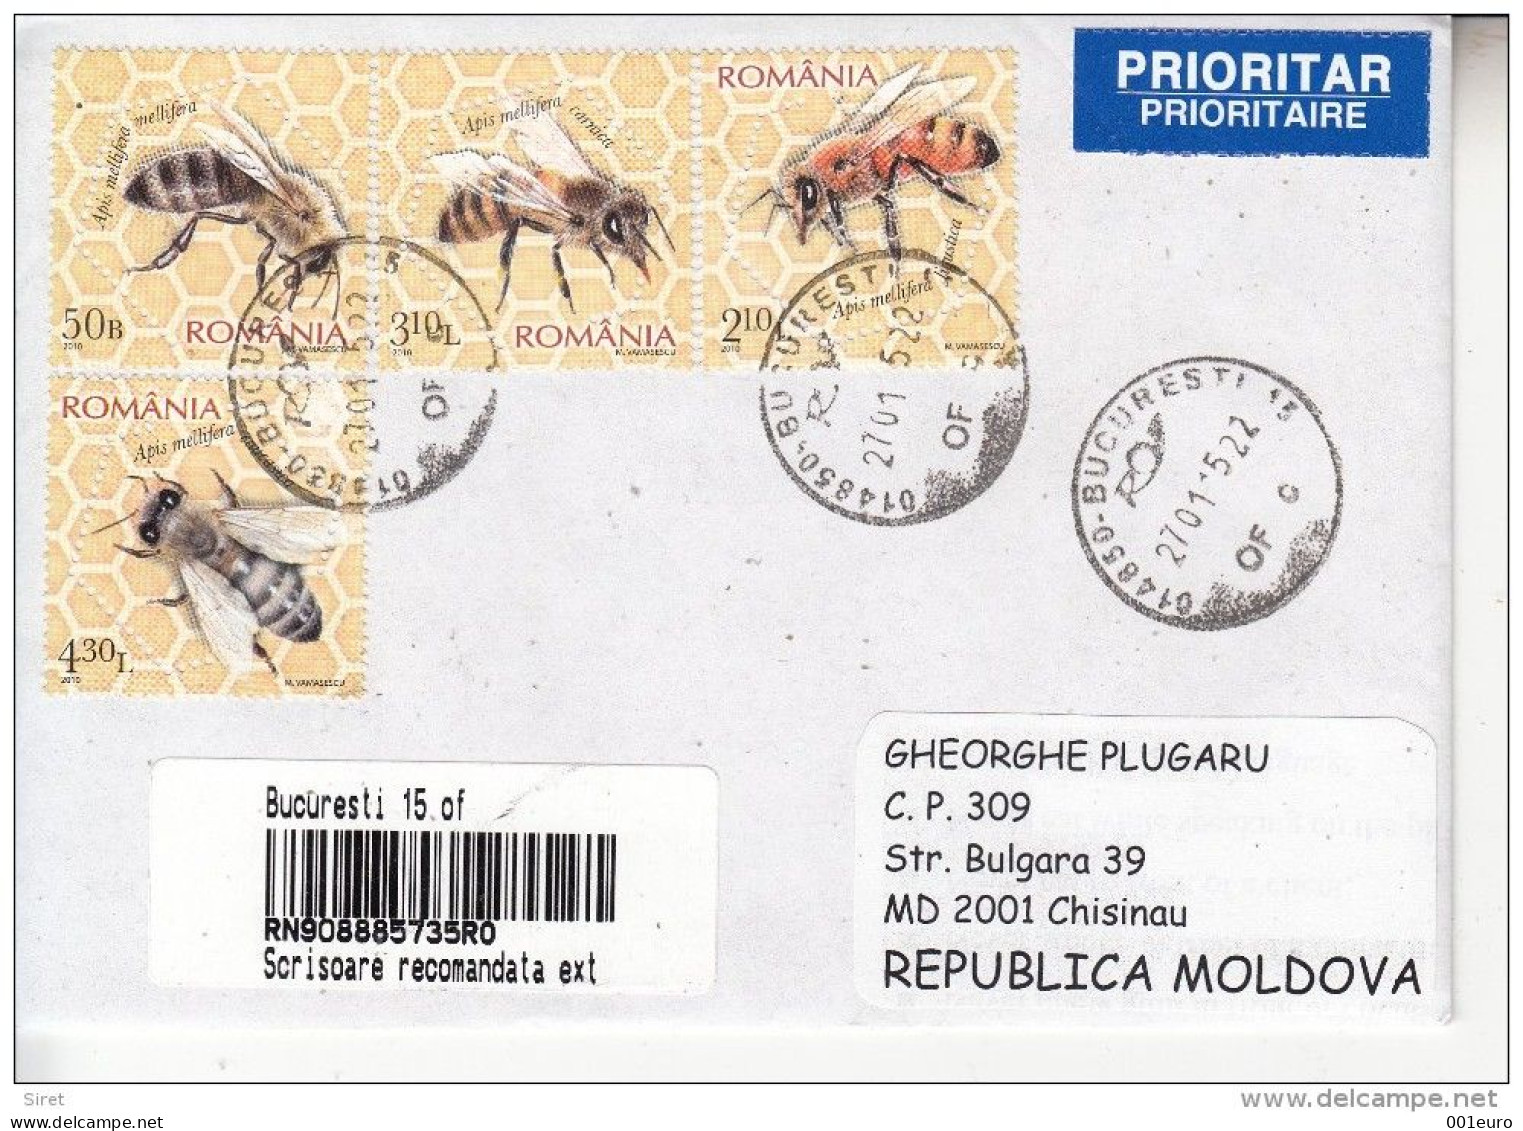 ROMANIA : HONEY BEES 4 Stamps On Registered Cover Circulated To MOLDOVA #300589234 - Registered Shipping! - Used Stamps